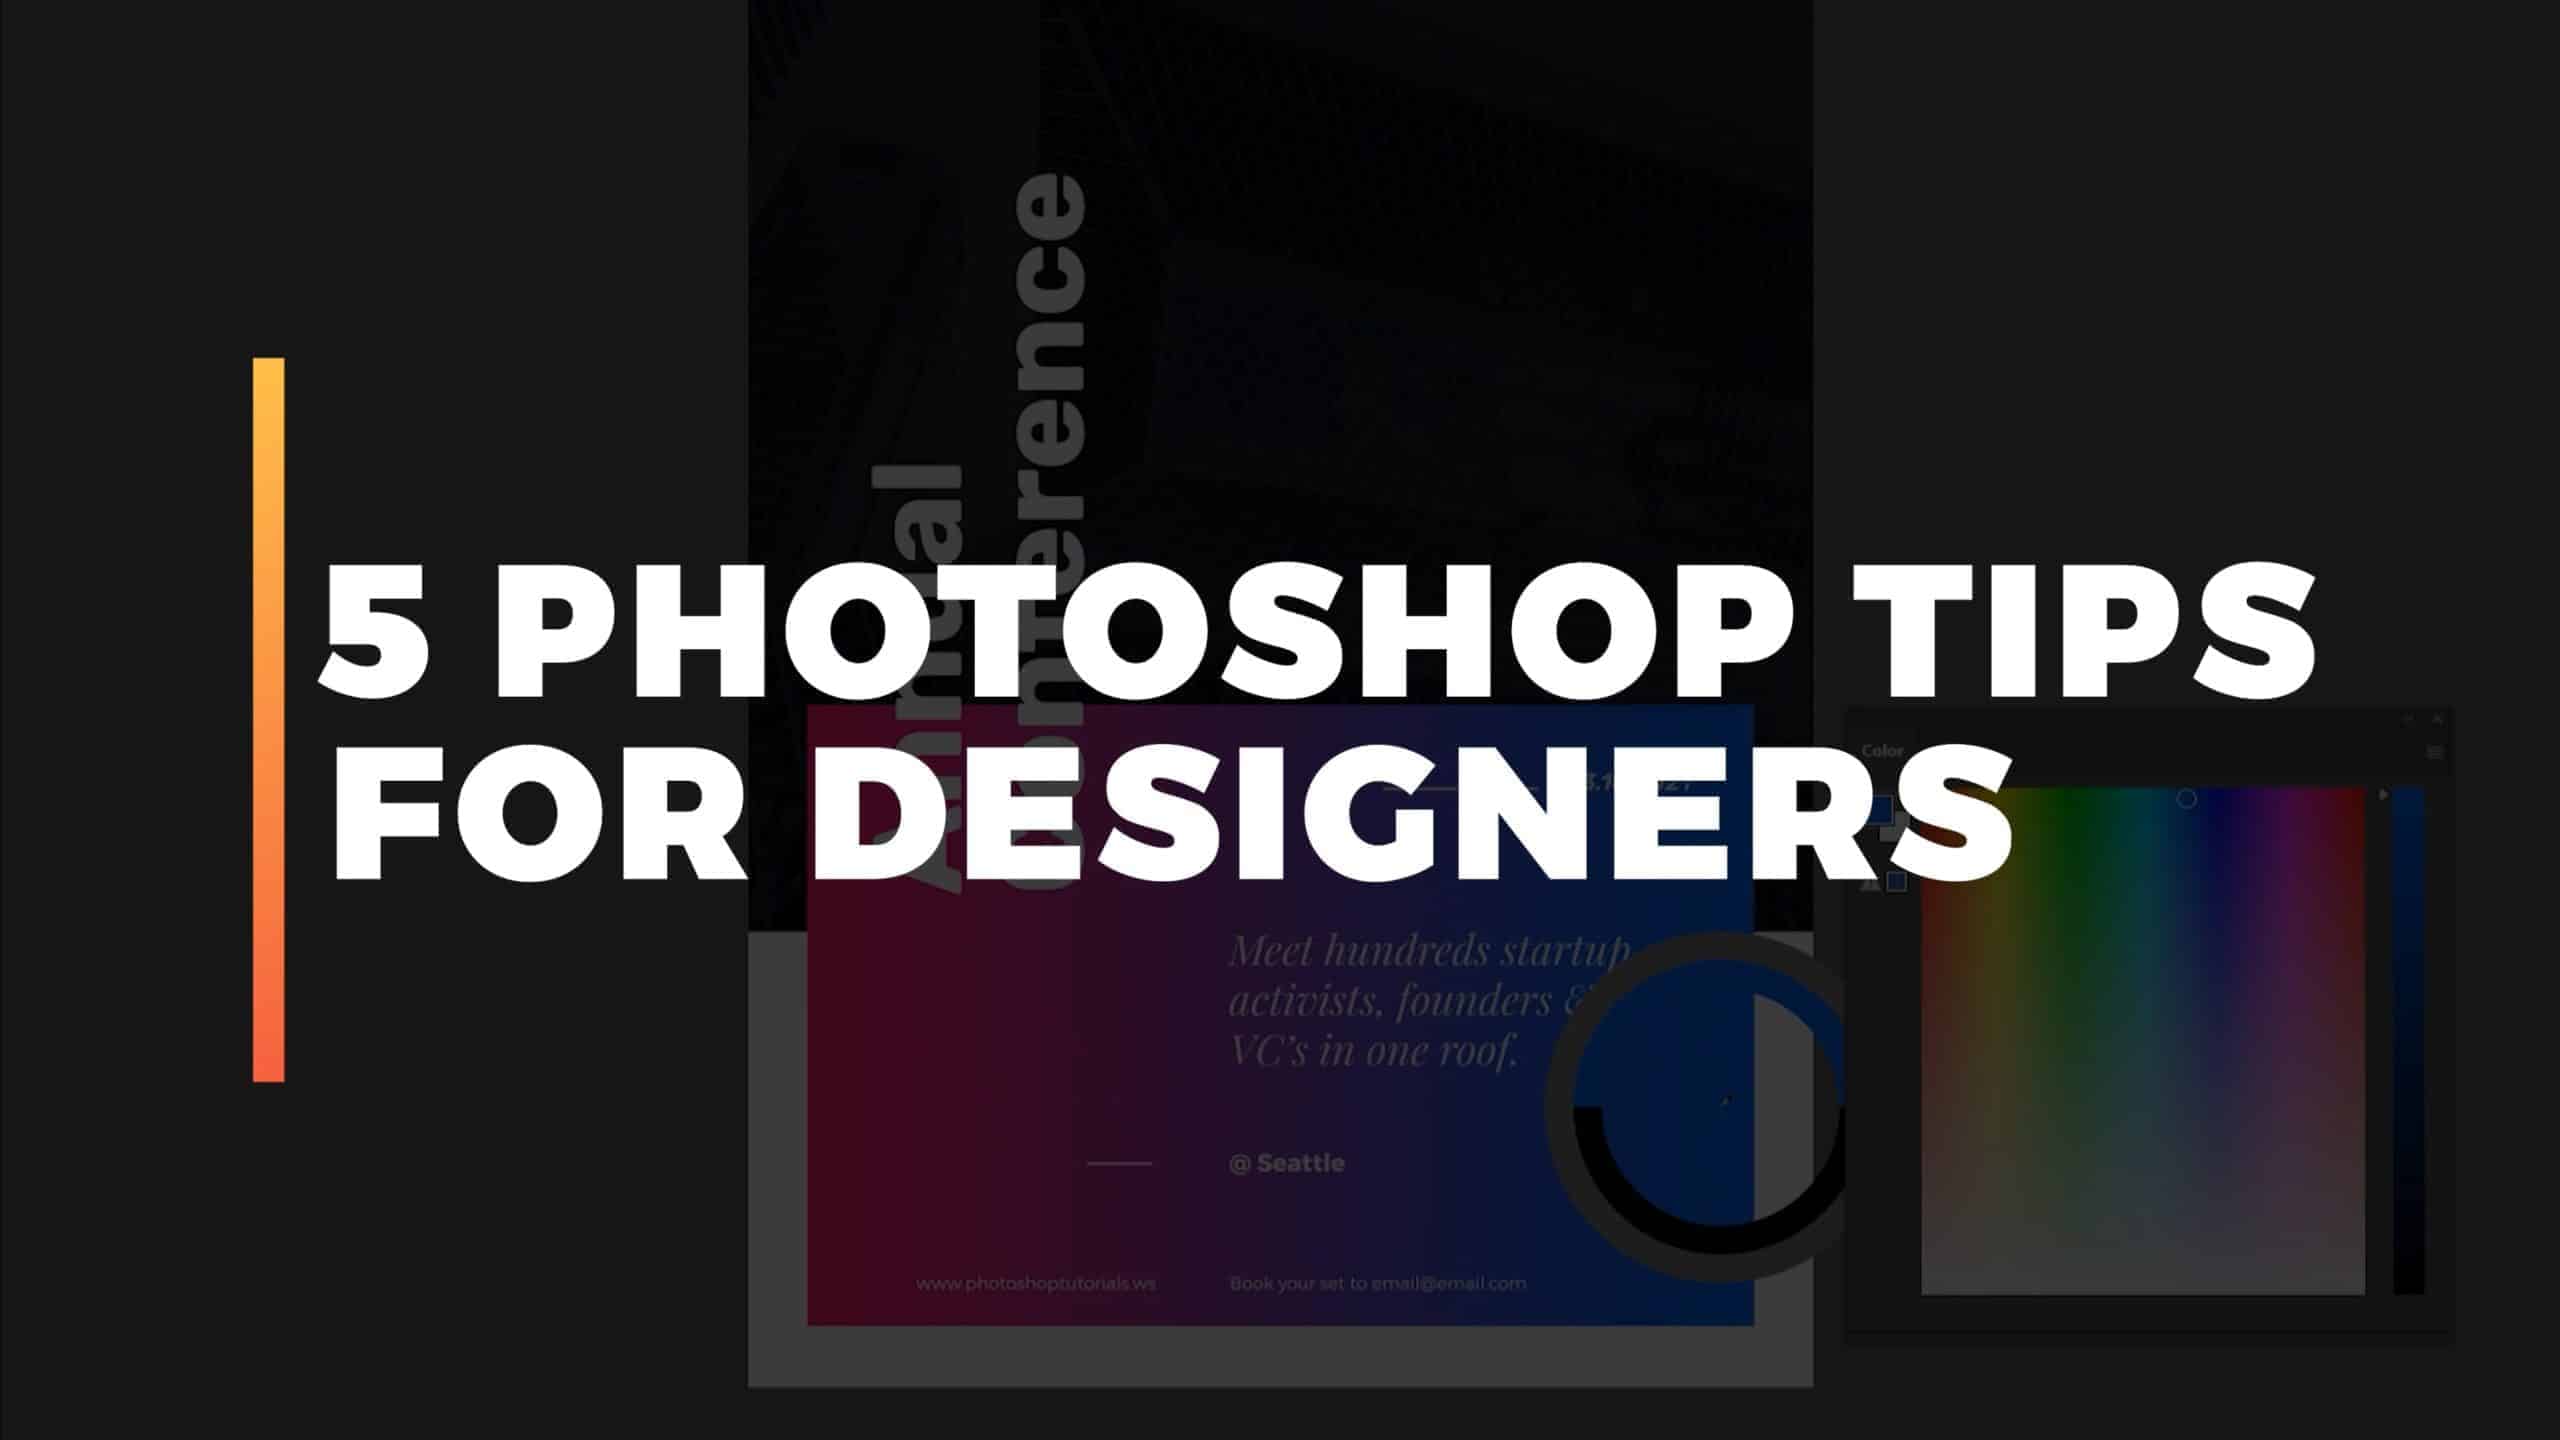 5 Photoshop Tips for Designers